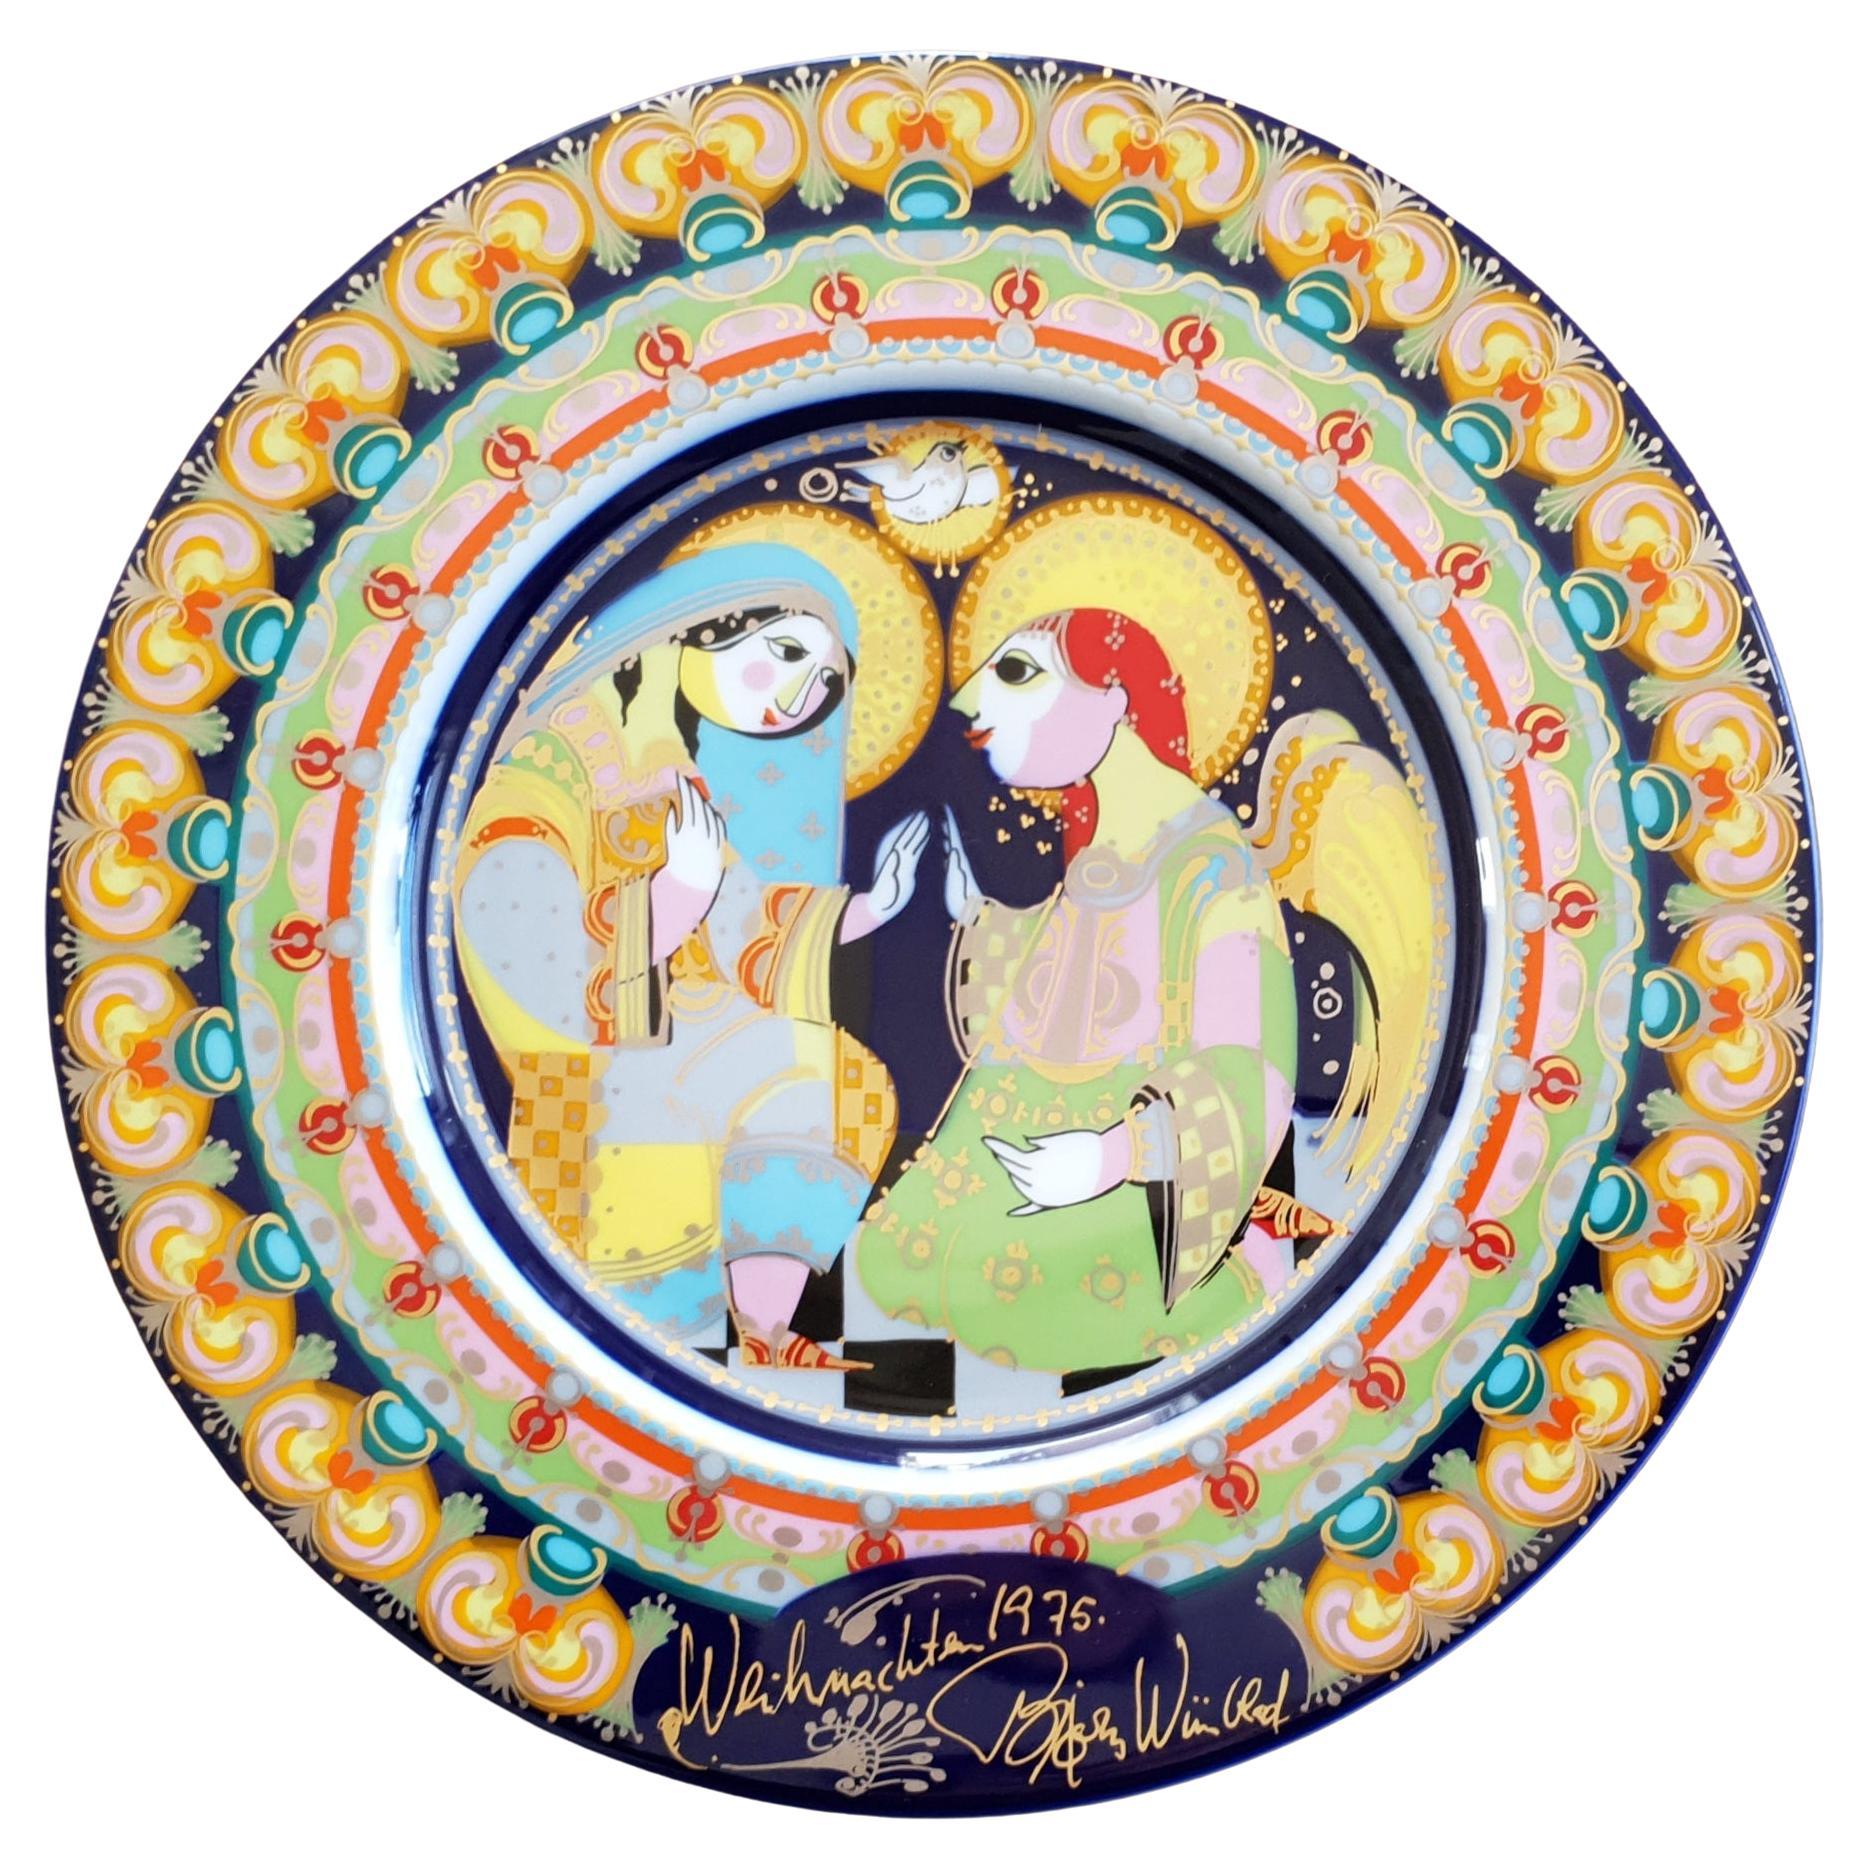 Bjørn Wiinblad Christmas Plate 1975 "Annunciation to the Blessed Virgin Mary"